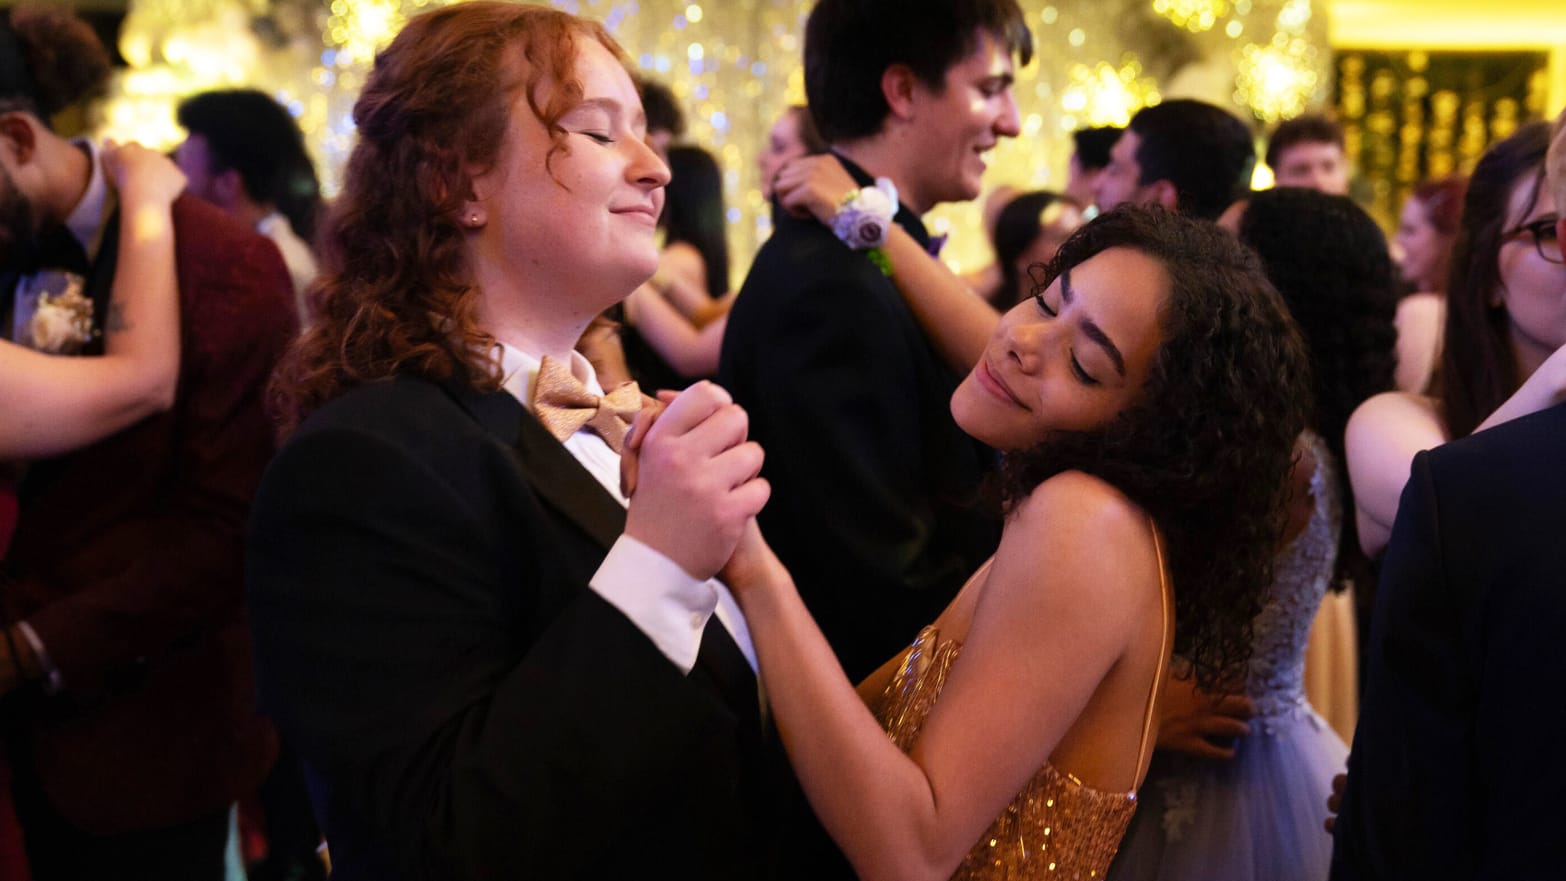 ‘Prom Dates’ Movie Review: A Somewhat Fun Coming-of-Age Comedy